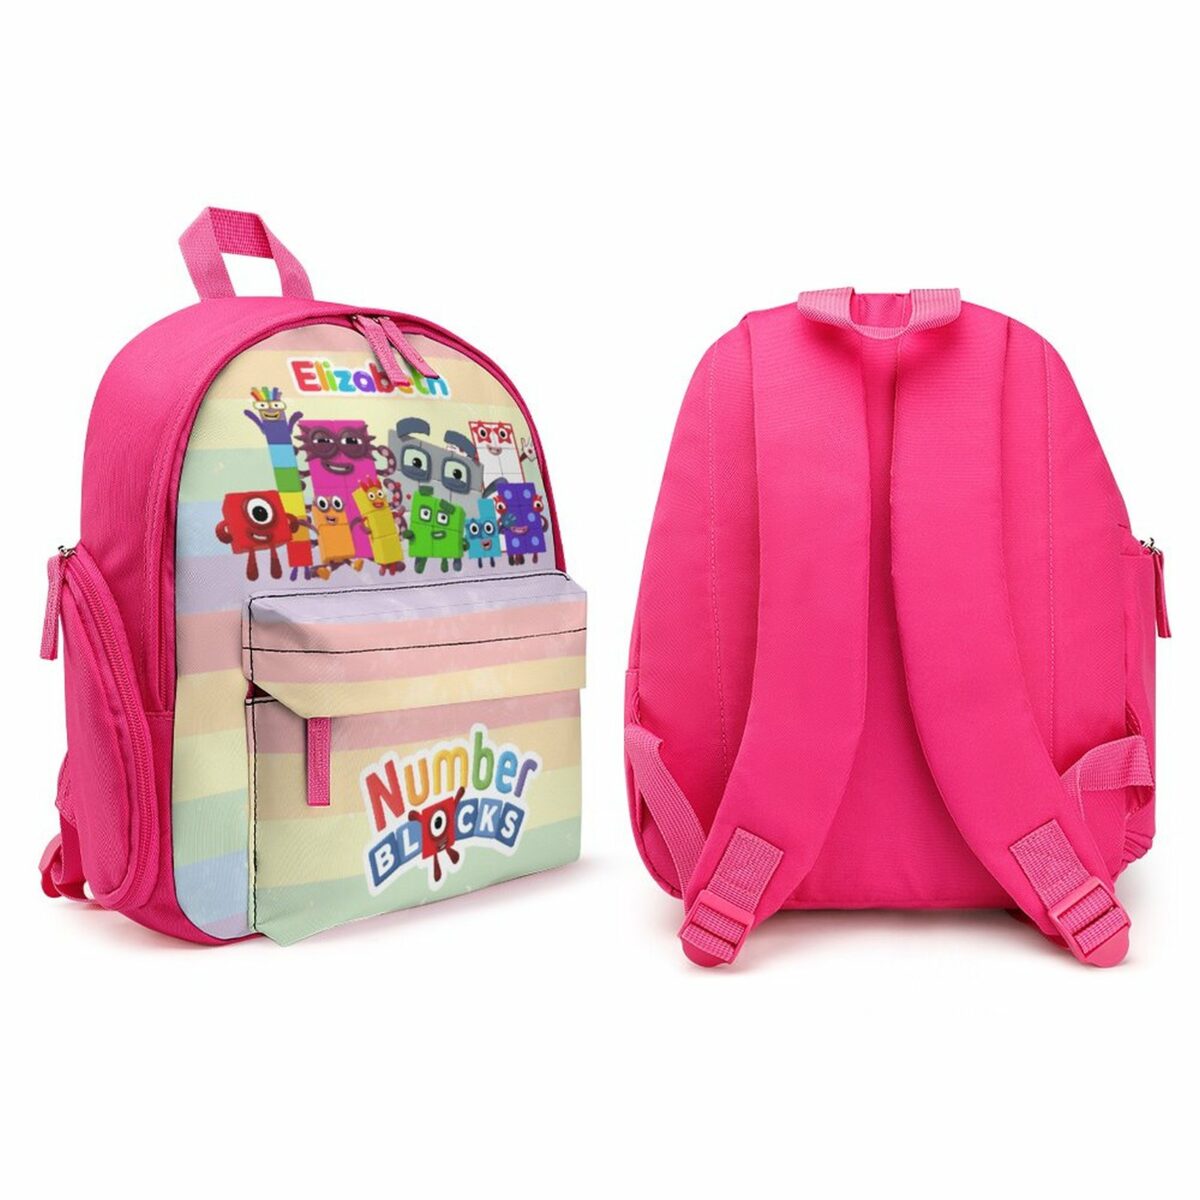 Personalized Number Blocks Children’s School Bag – Pink Toddlers Backpack Cool Kiddo 16